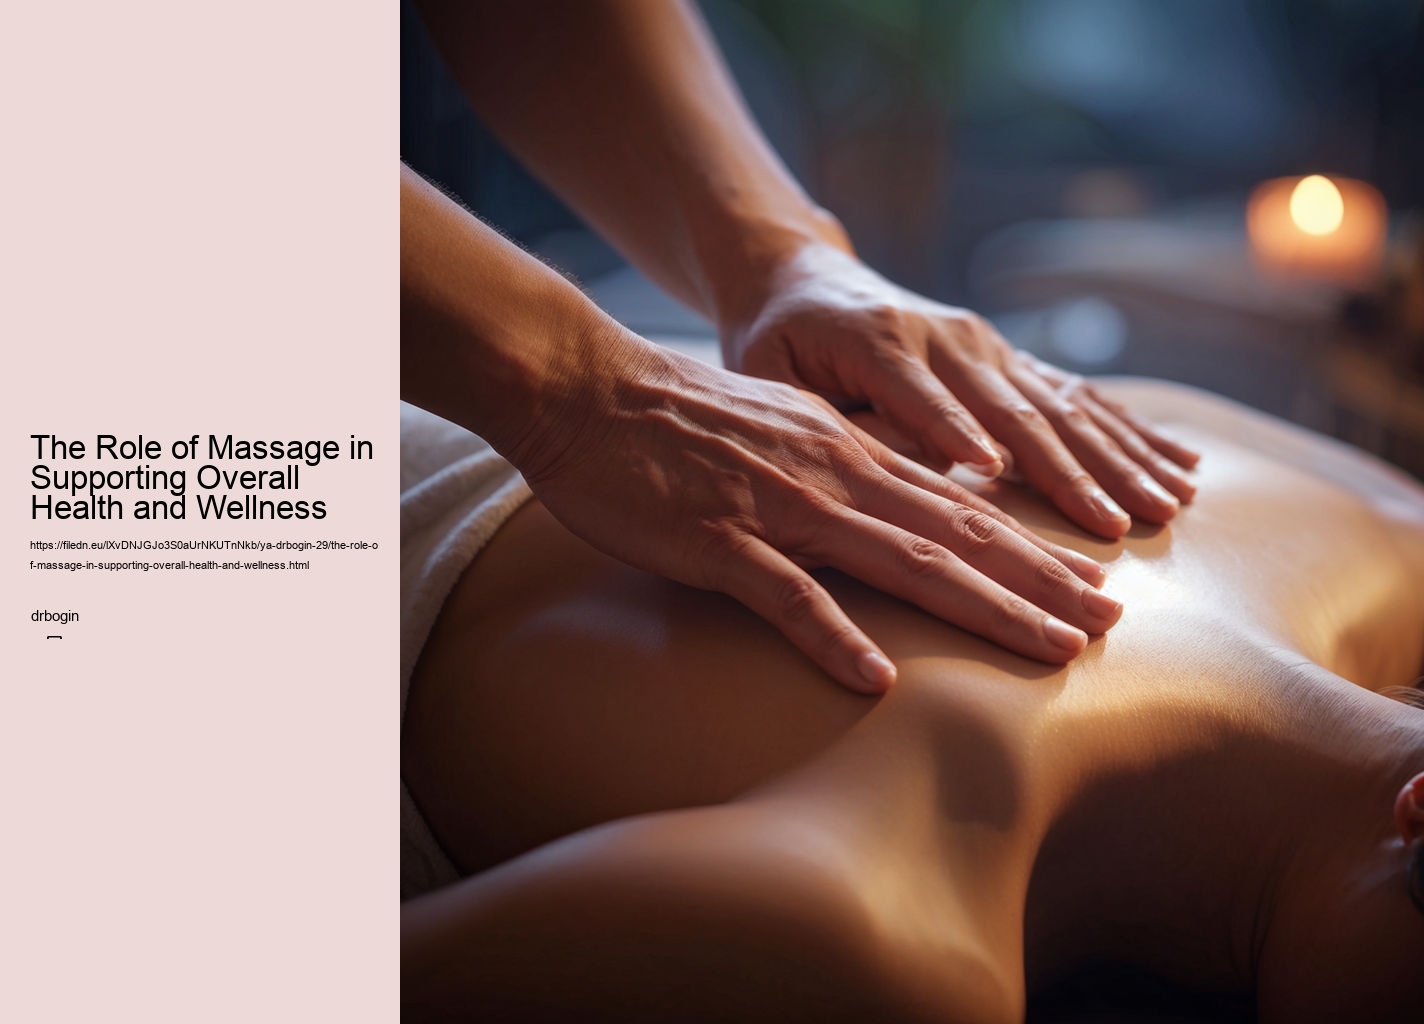 The Role of Massage in Supporting Overall Health and Wellness